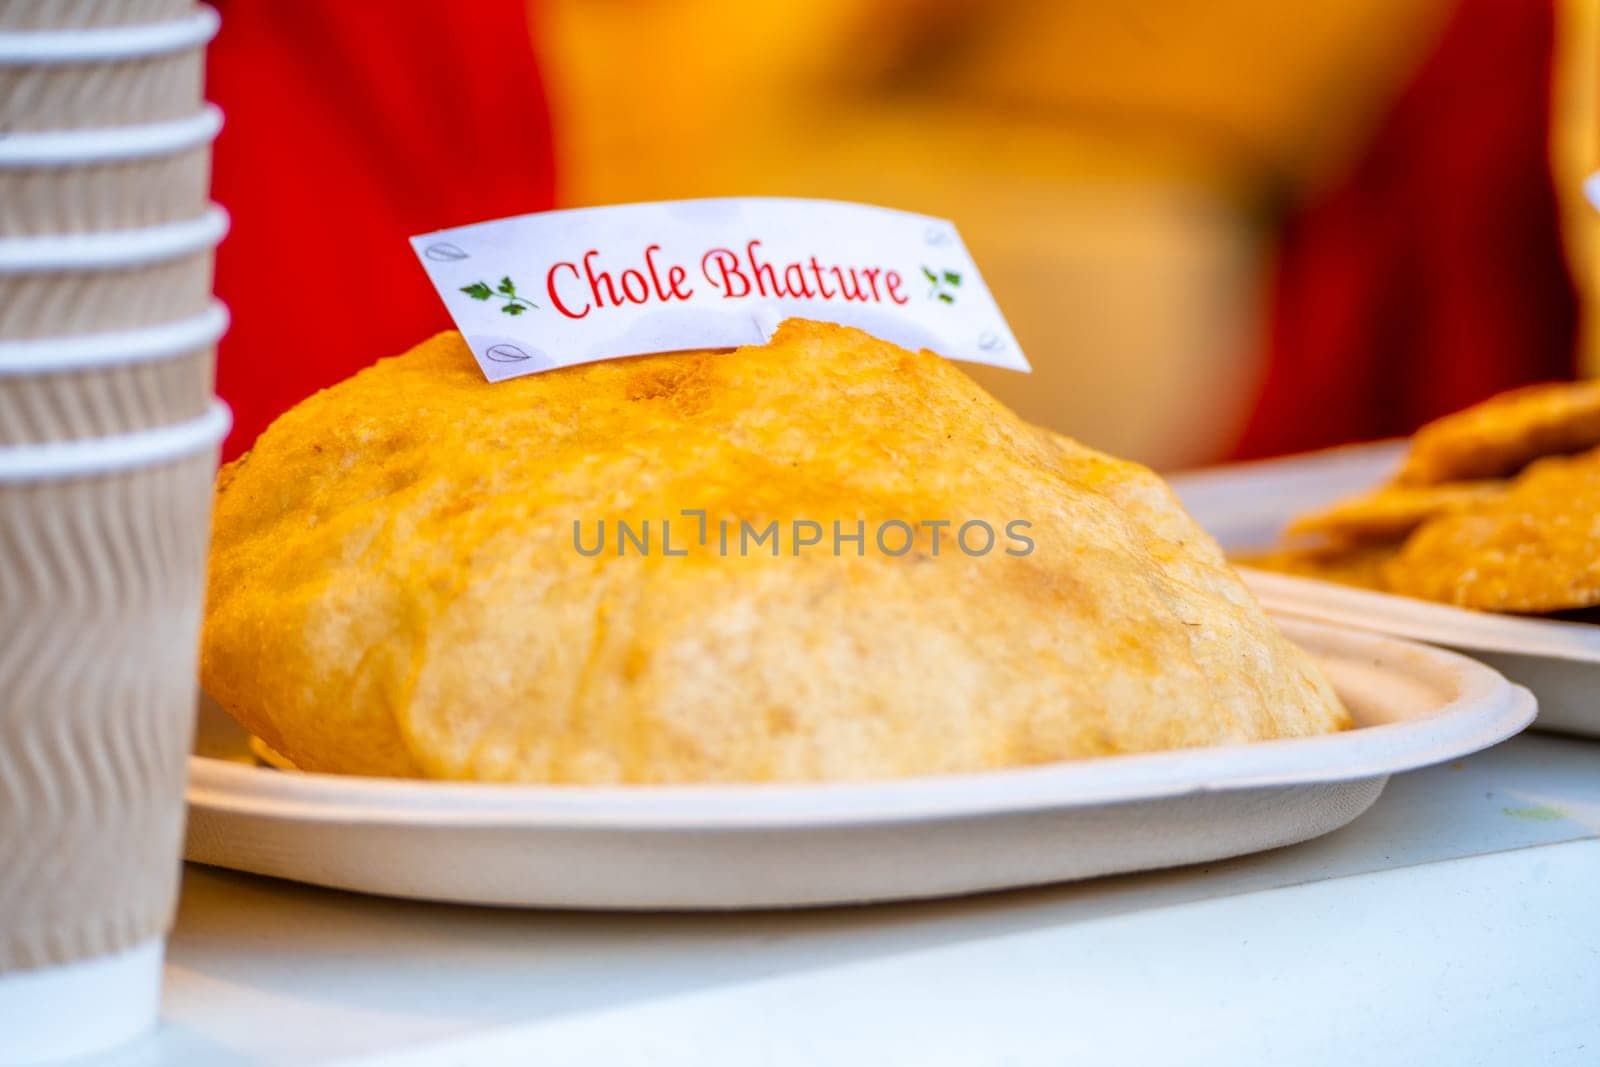 Plate with food and tag of chole bhature showing the puffed flat bread popularly eaten with chickpeas by Shalinimathur